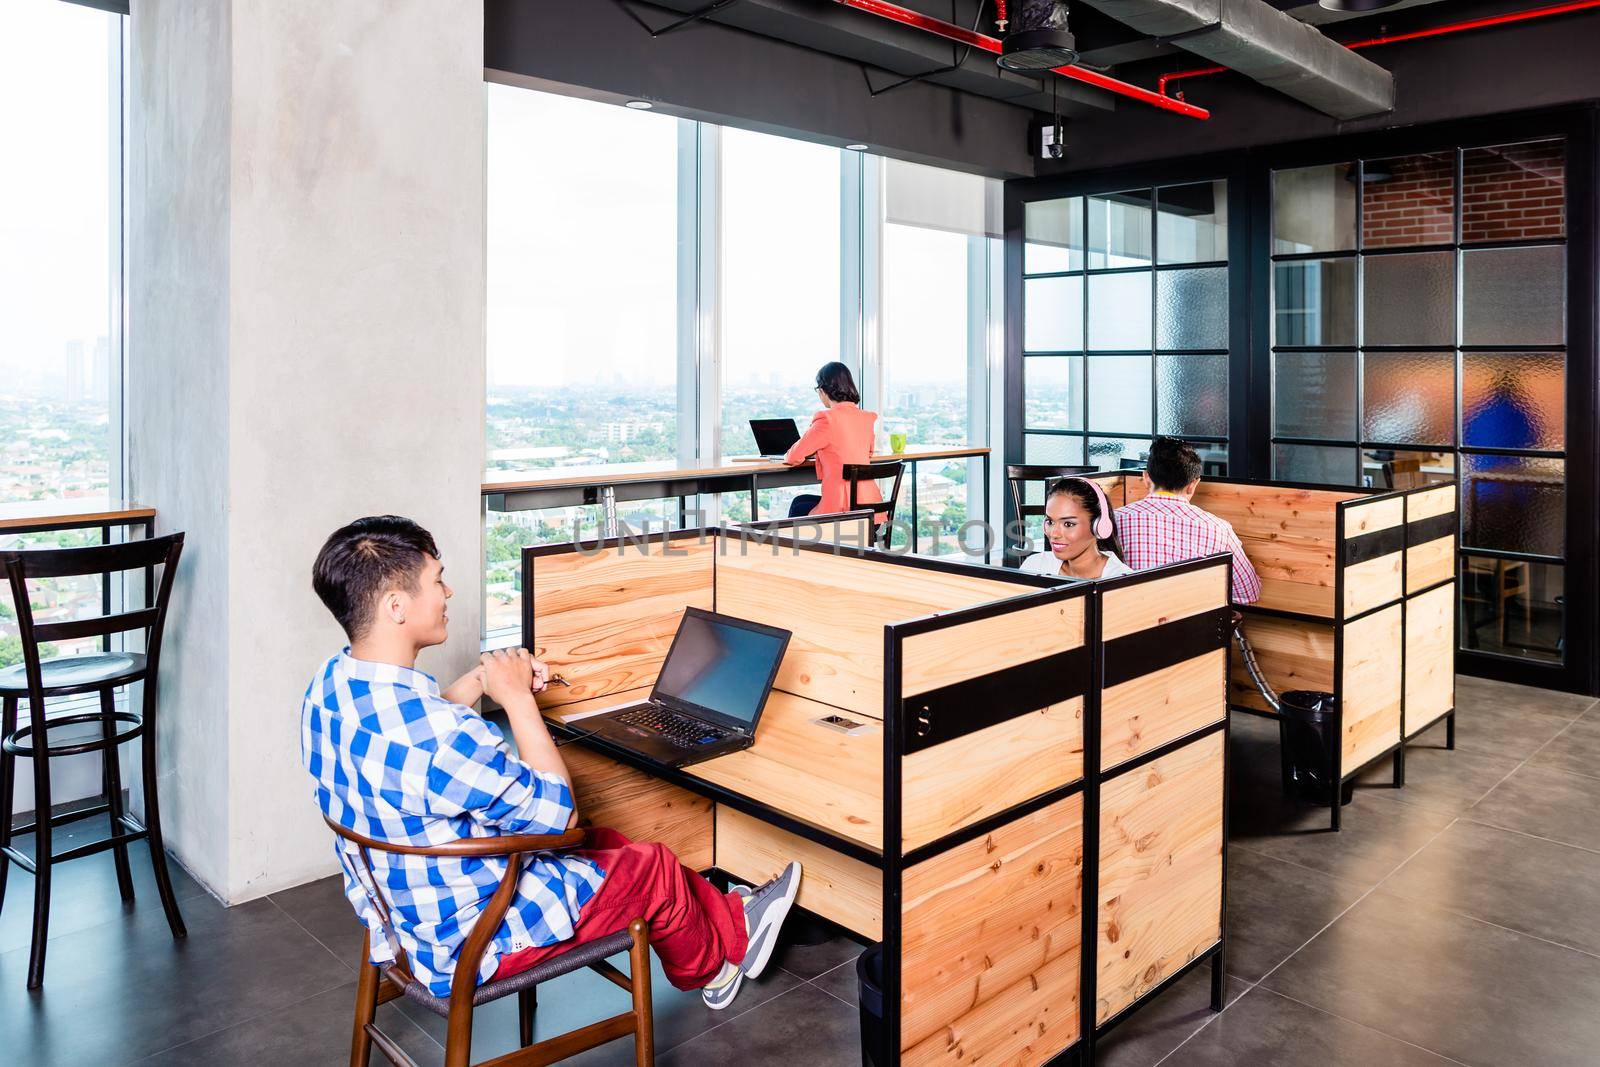 Start-up business people in coworking office working in cubicles